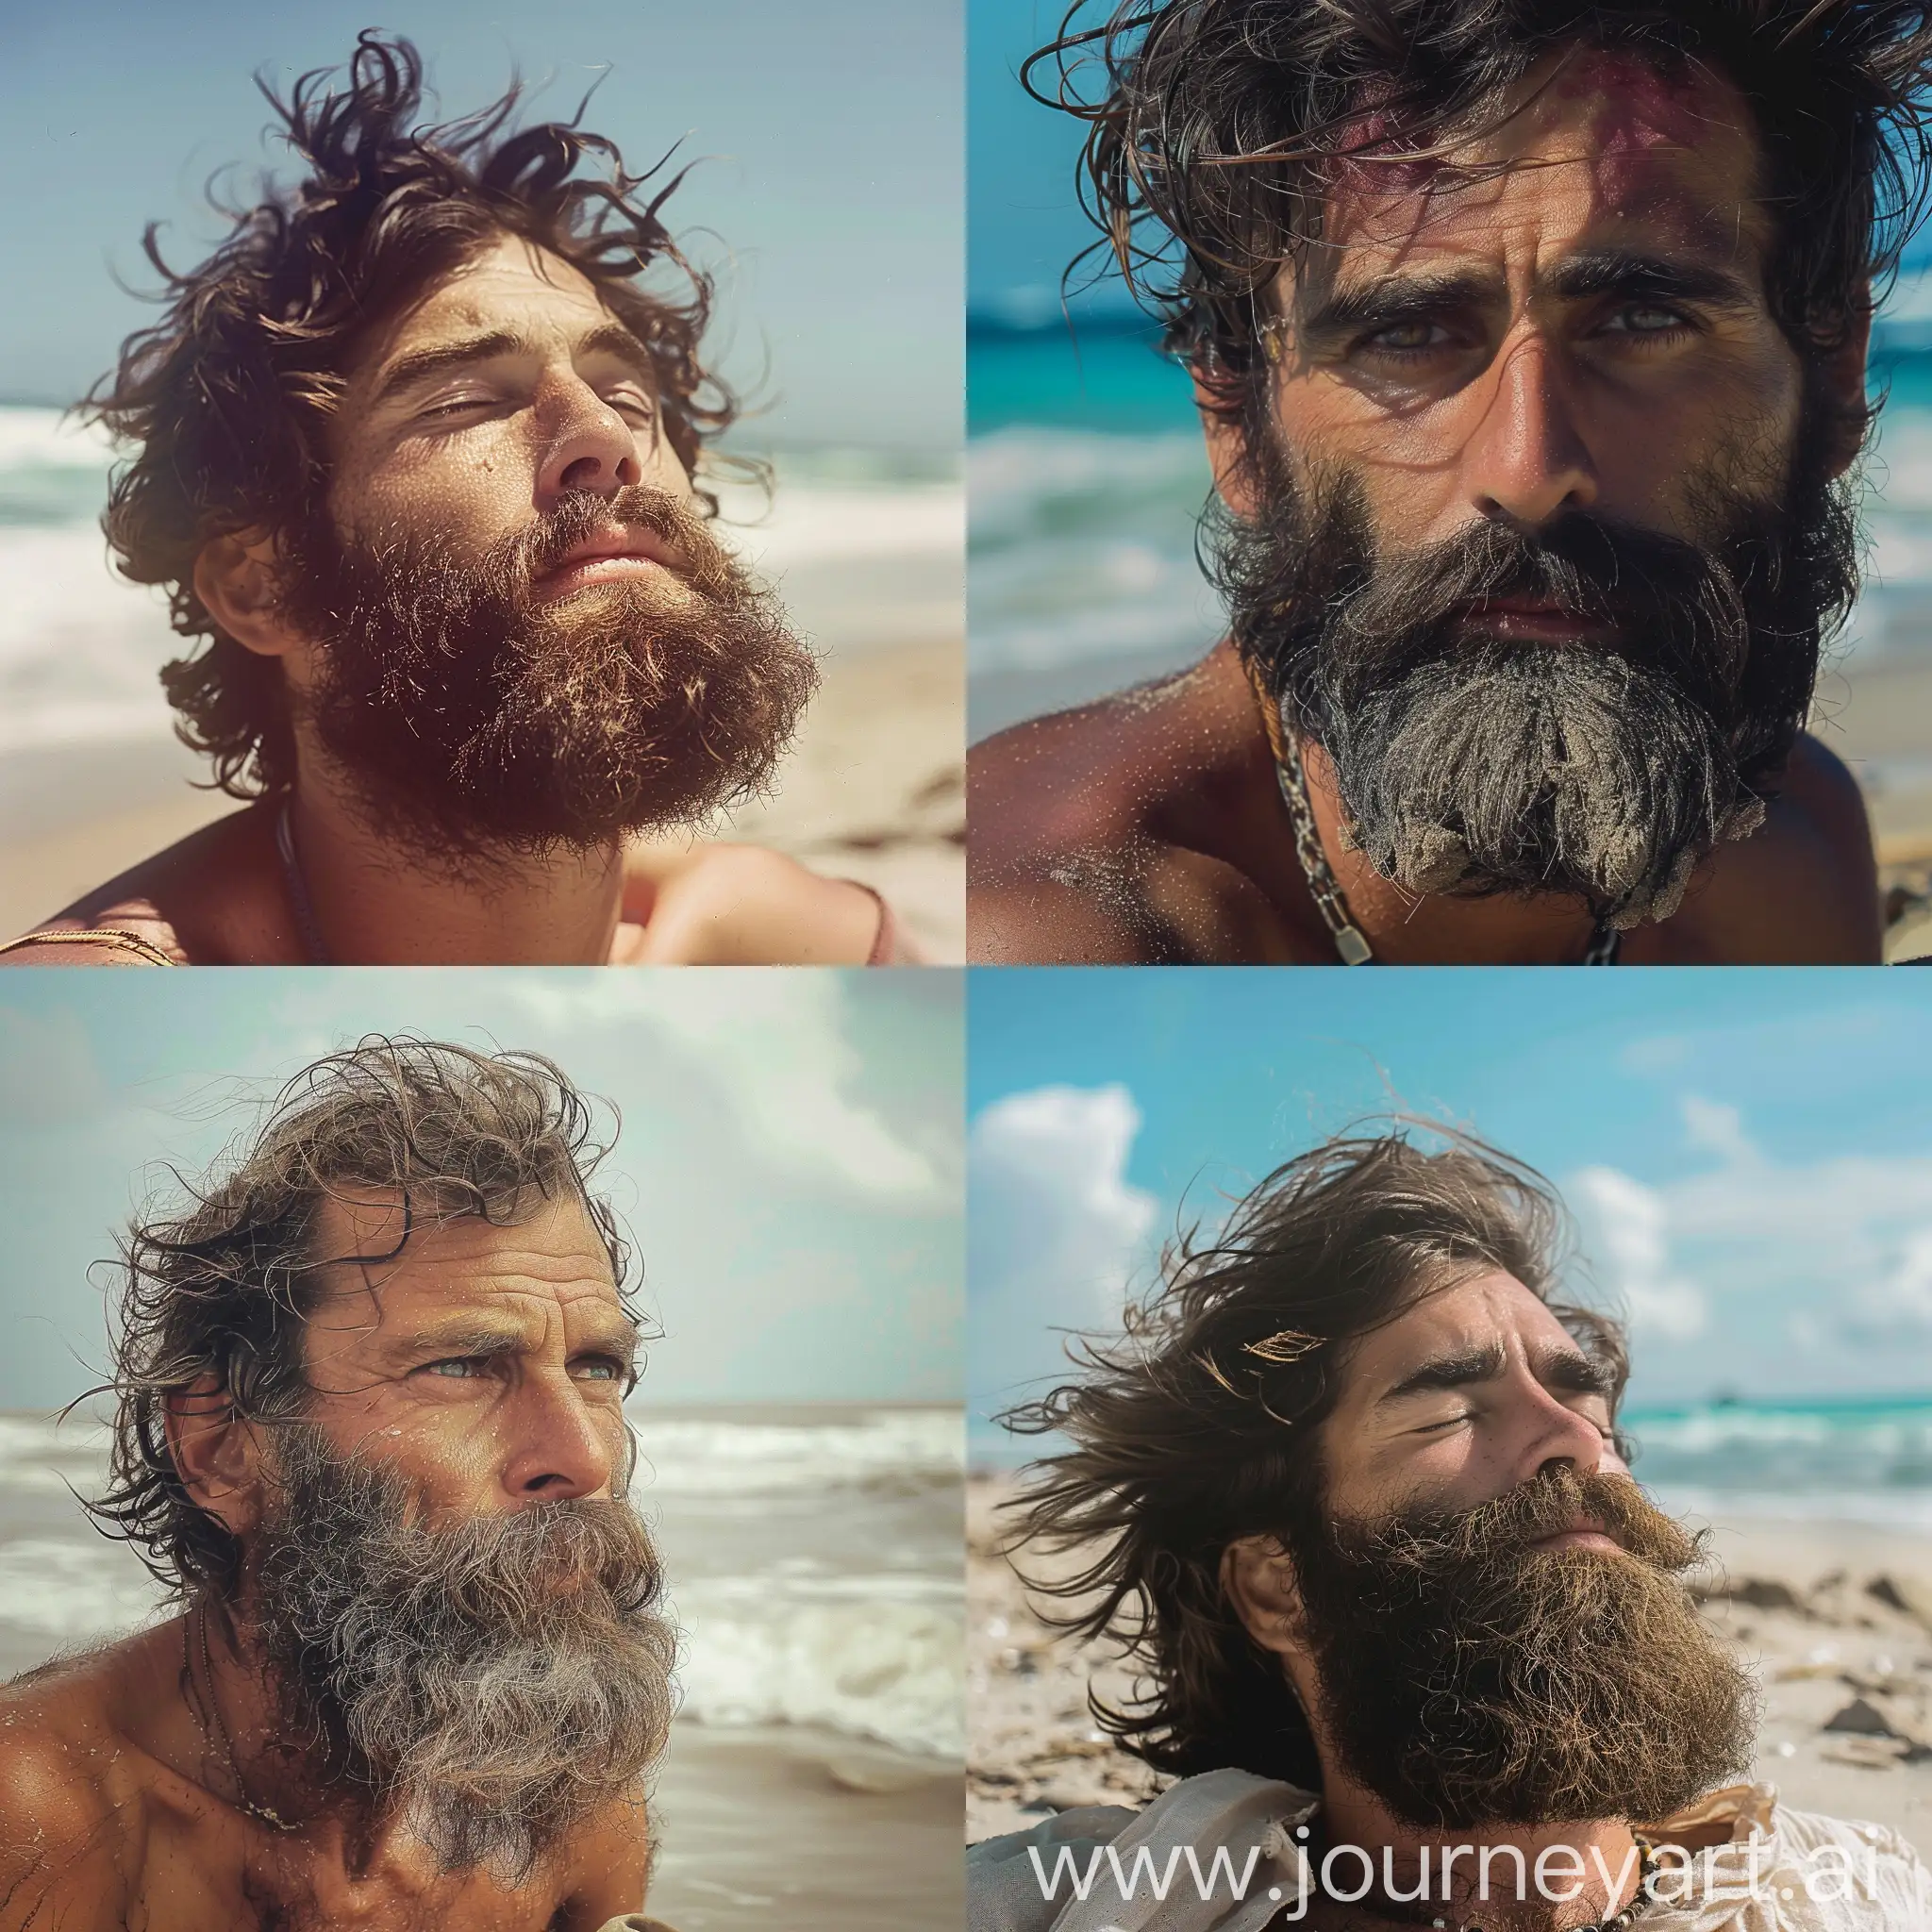 stoned man with beard and without heat. stay on lonley beach